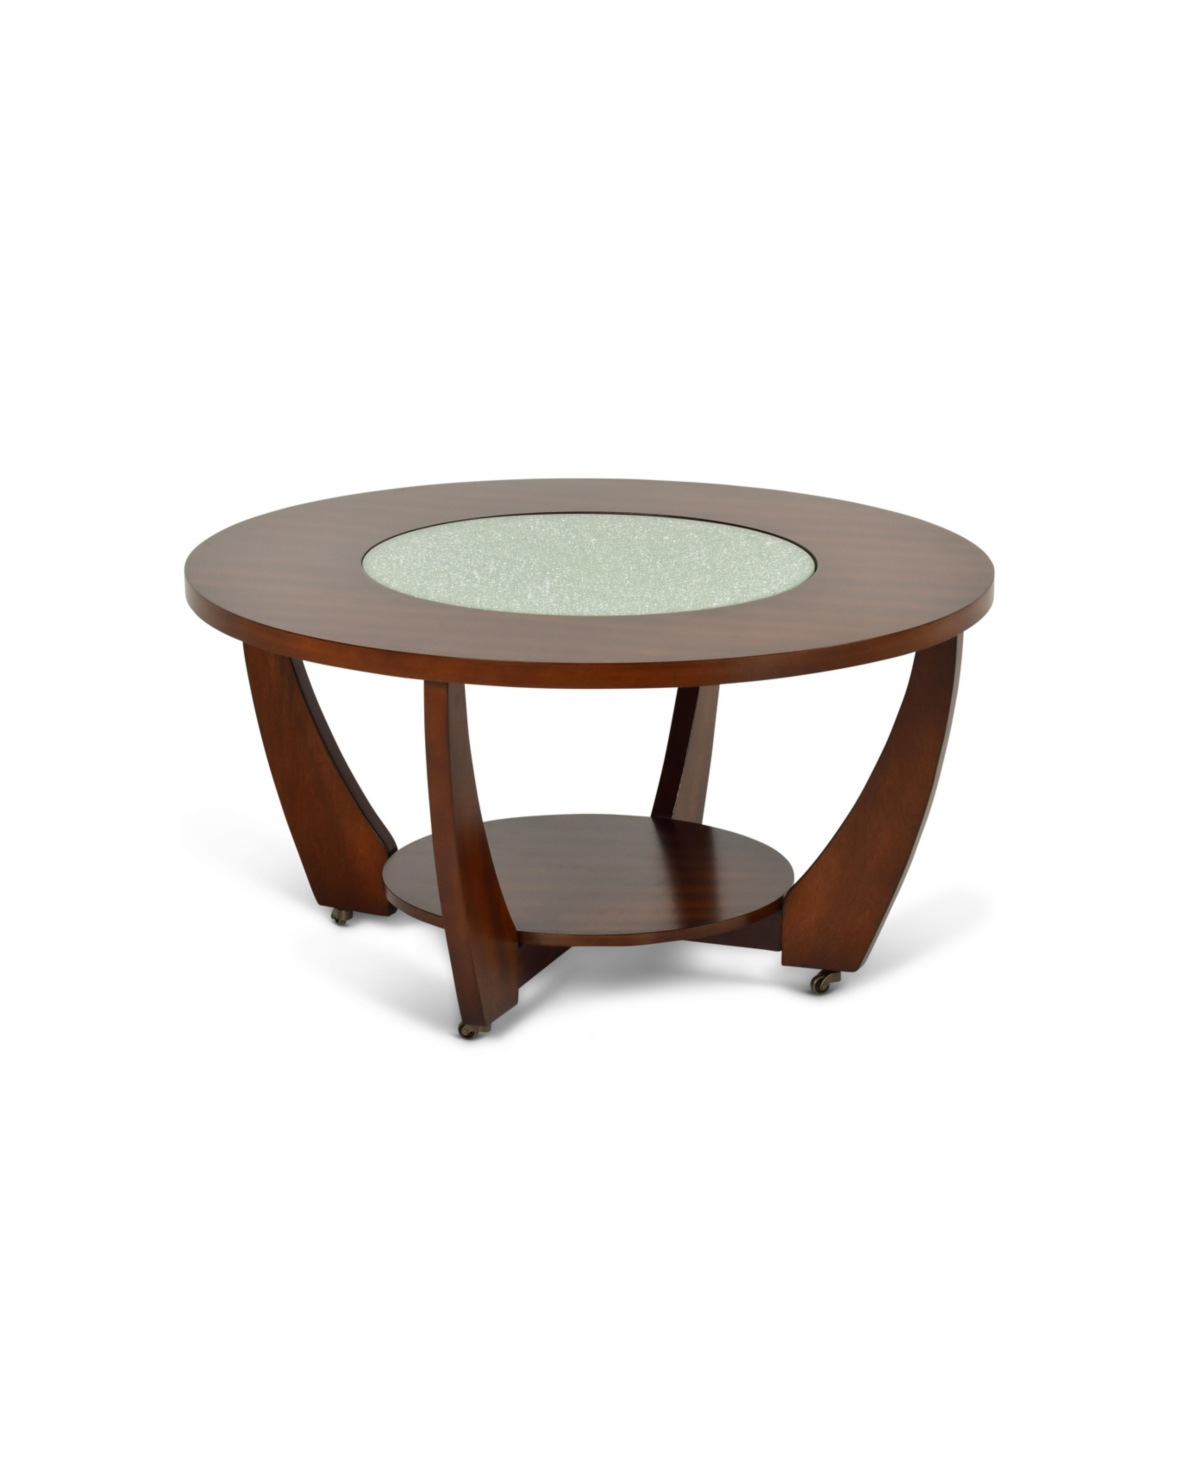 Steve Silver Rafael 39.5" Round Merlot Wood Cocktail Table With Casters In Merlot Cherry Finish